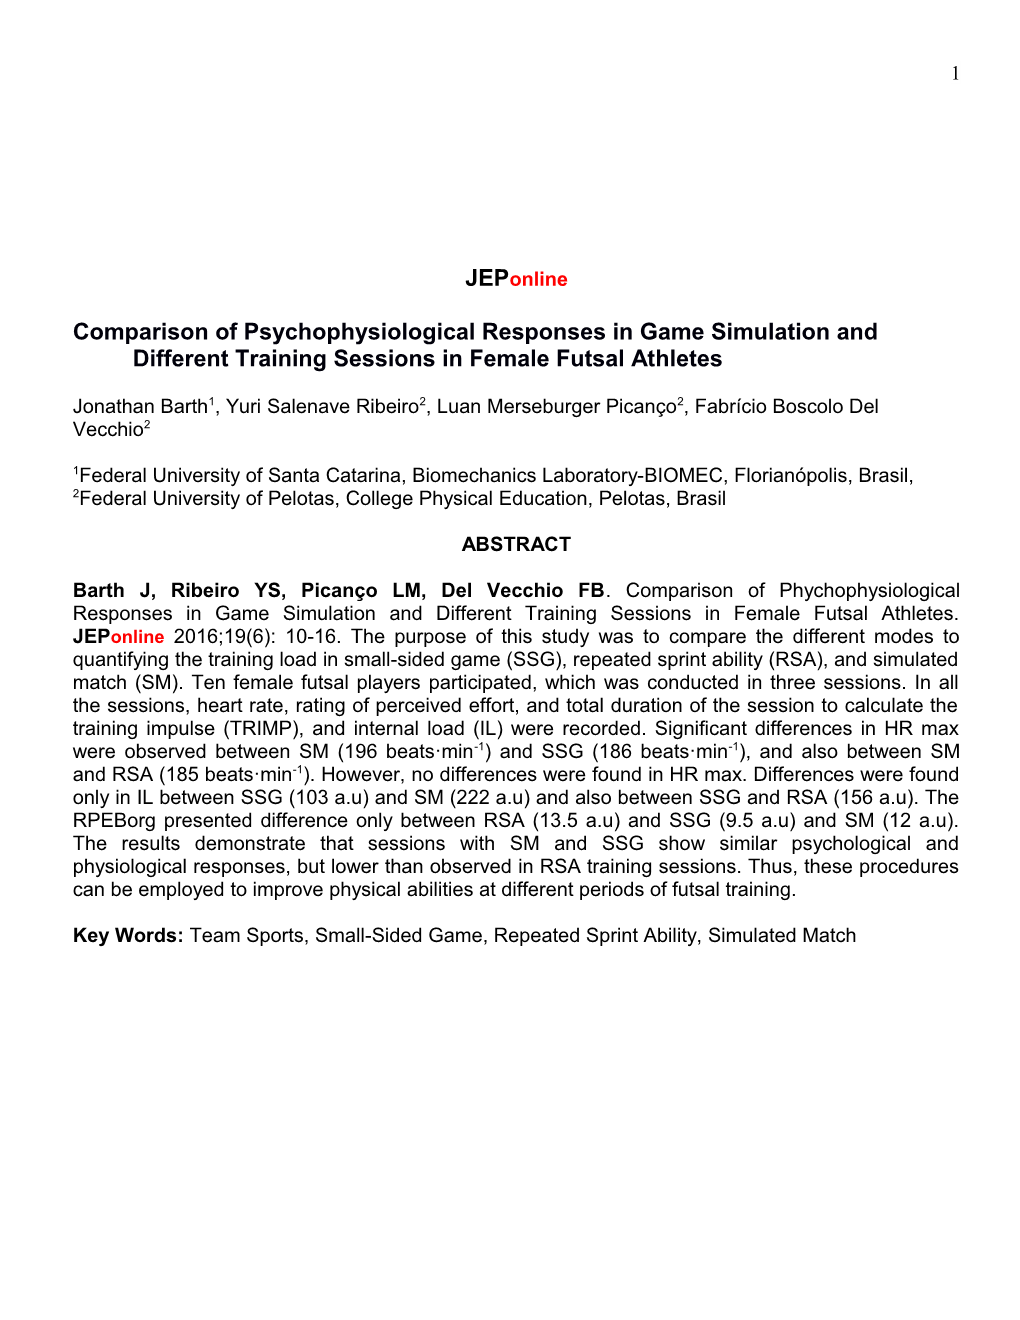 Comparison of Psychophysiologicalresponses in Game Simulation and Different Training Sessions